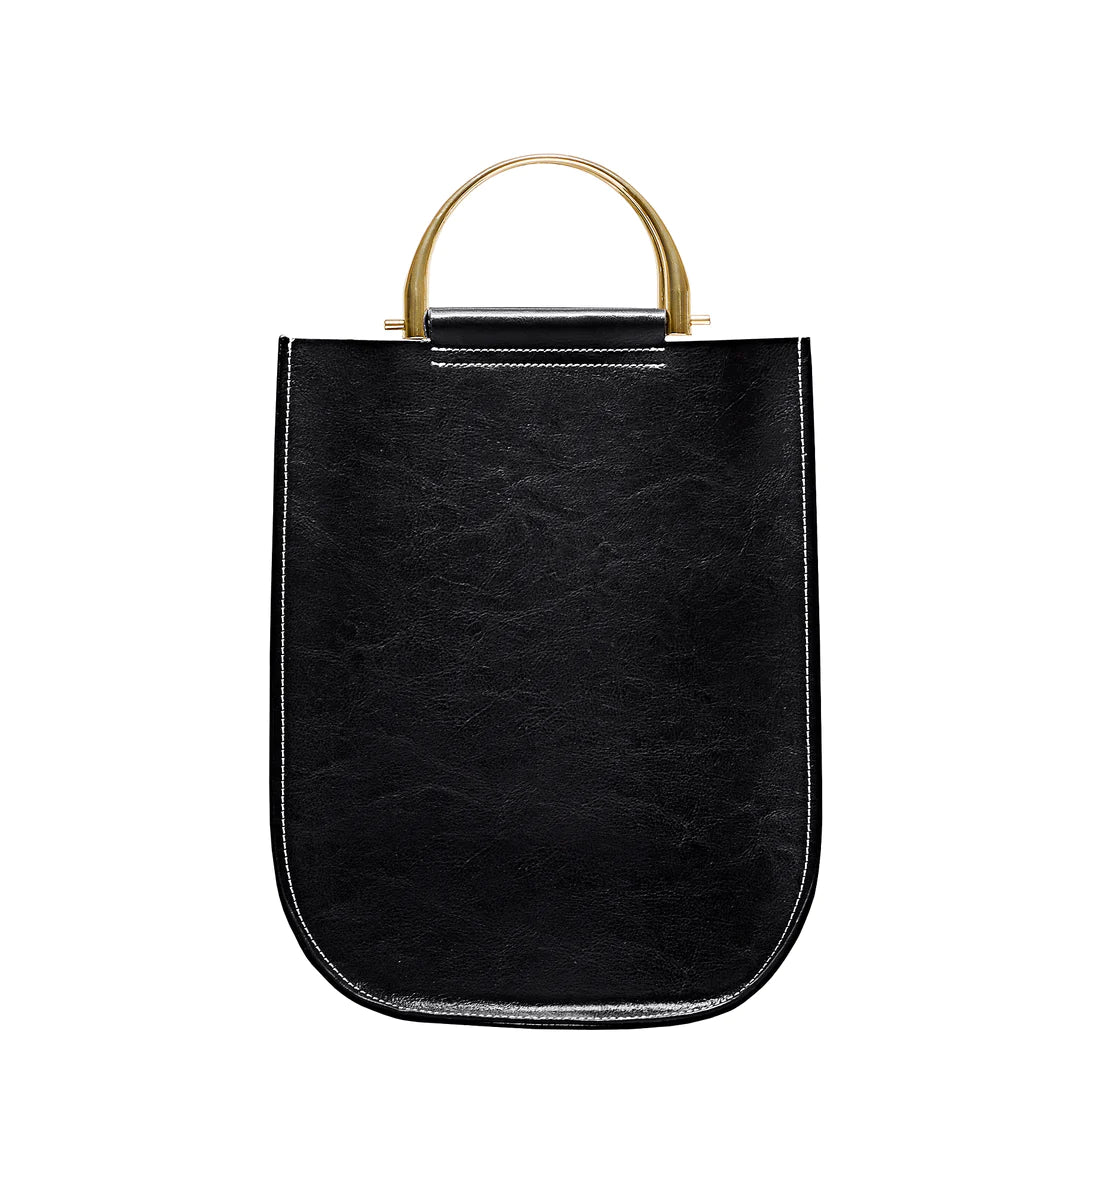 Soft Leather Tote in Black